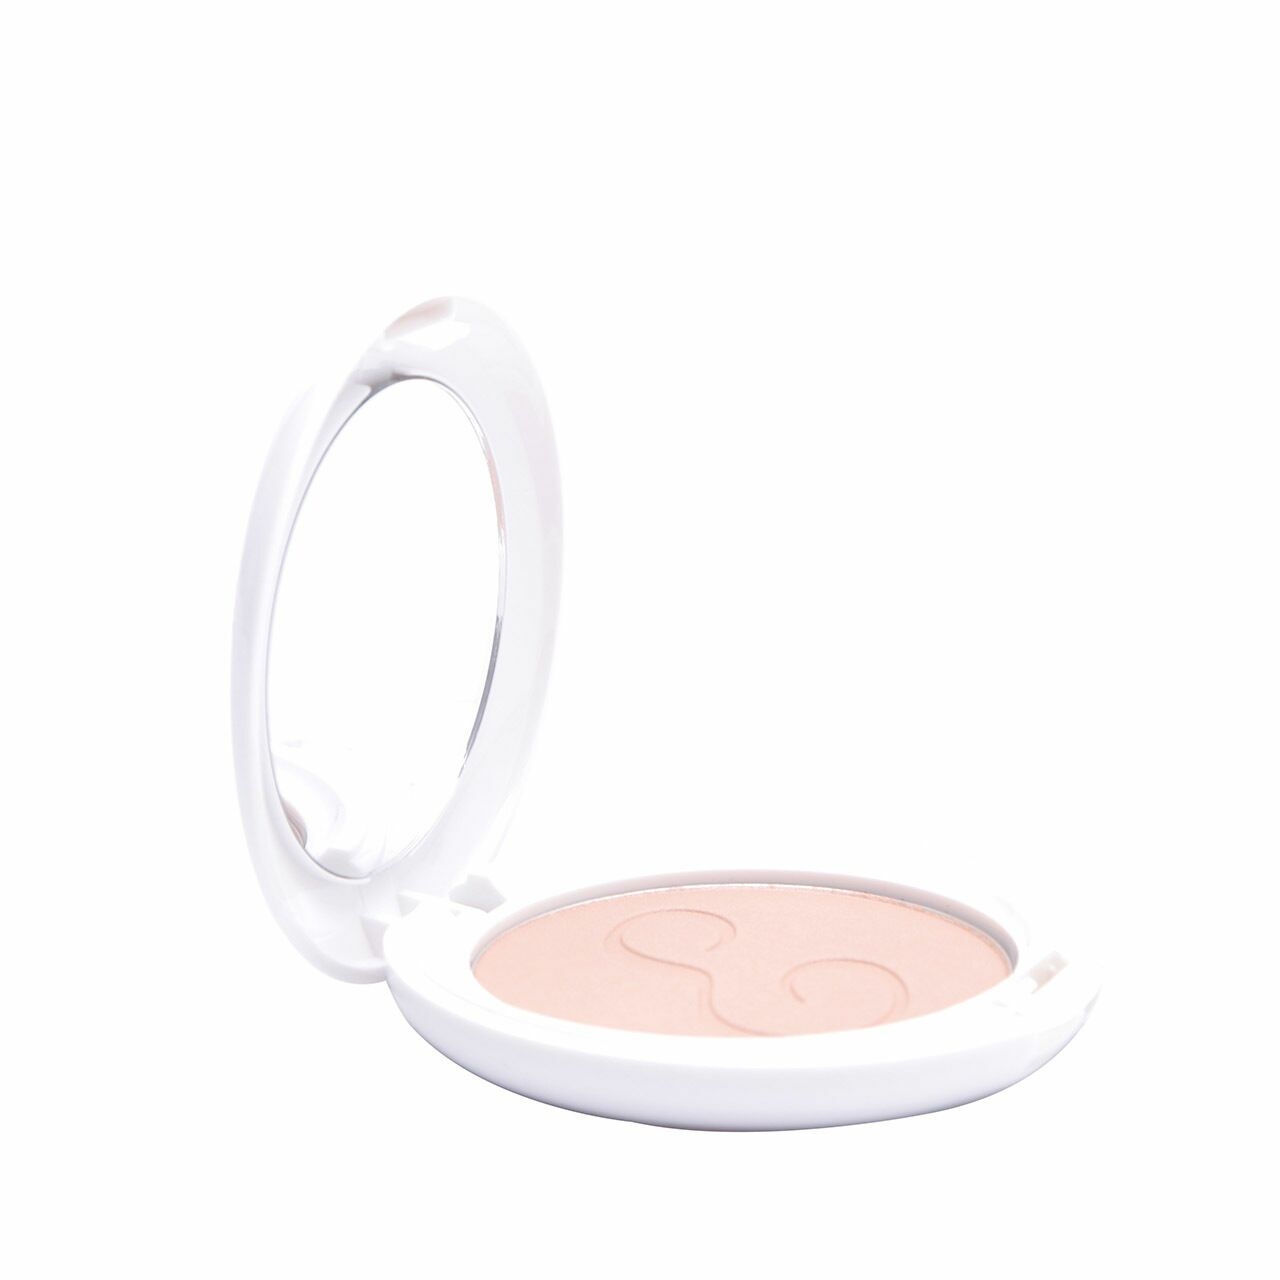 Embryolisse Radiant Complexion Compact Powder Universal Shade Faces